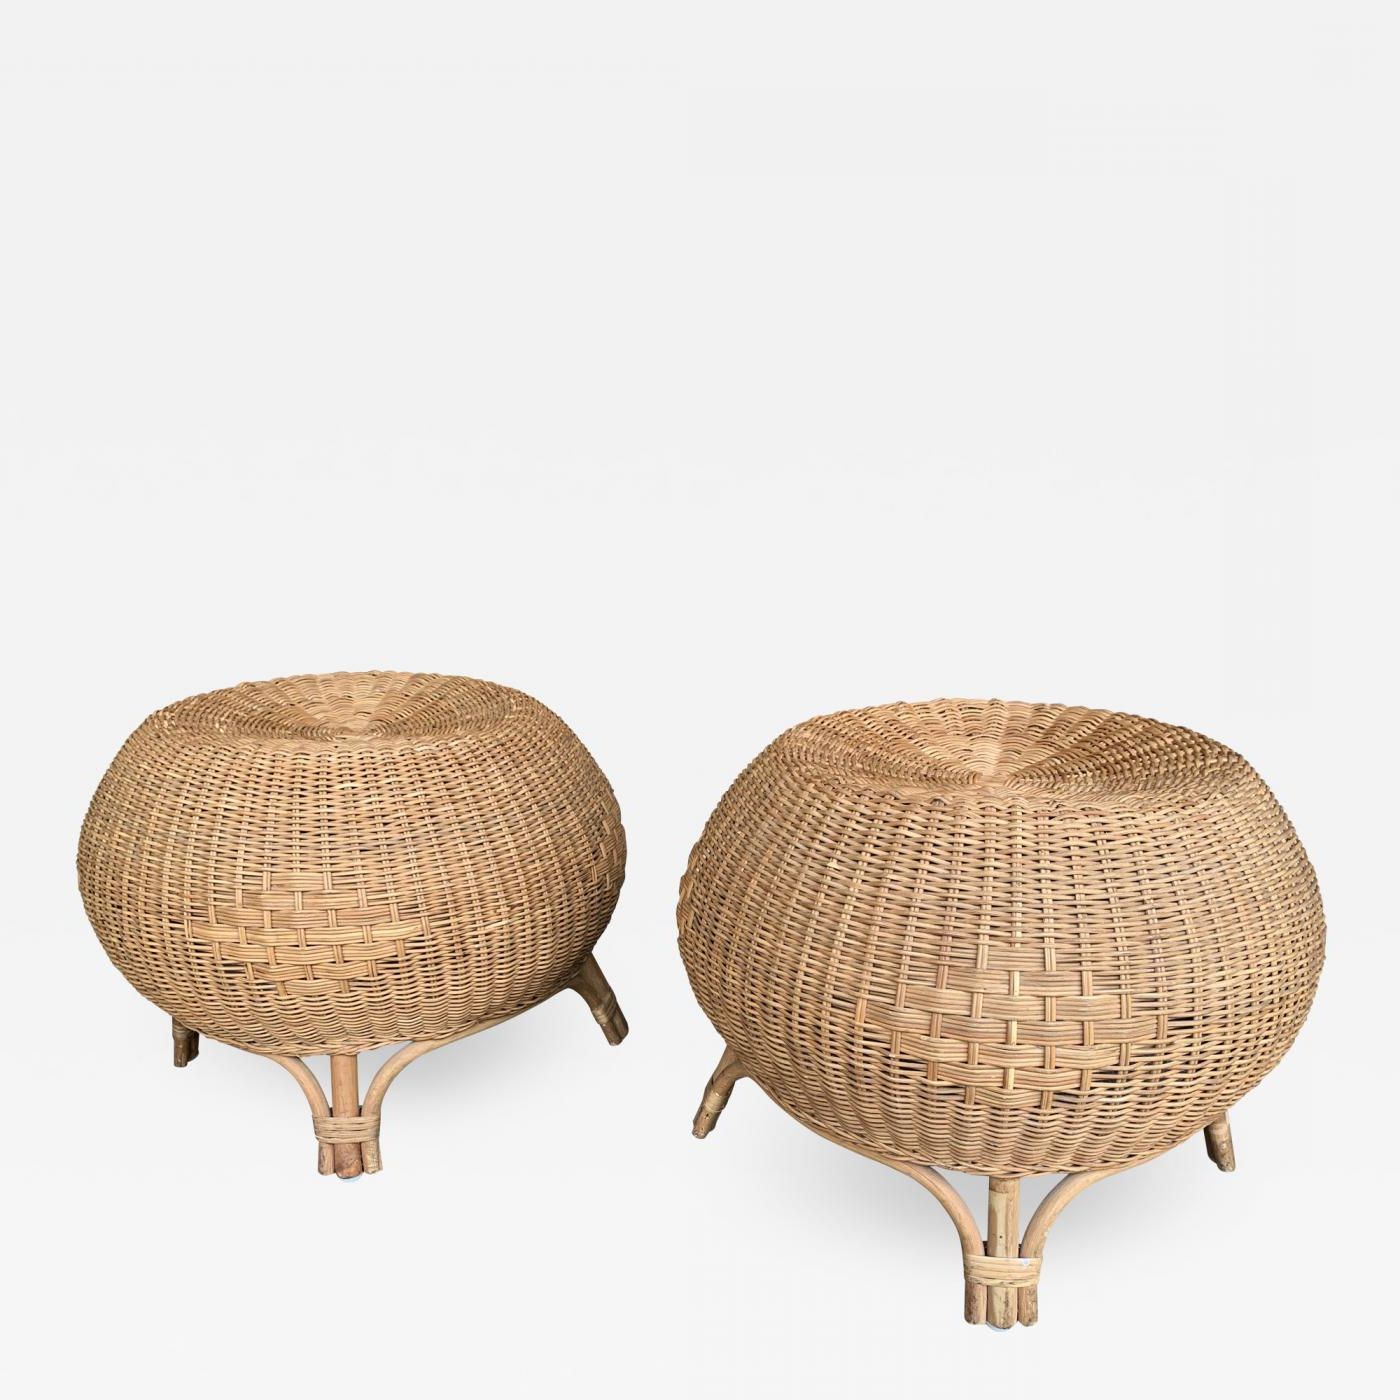 Paul Bert Serpette With Current Rattan Ottomans (View 5 of 15)